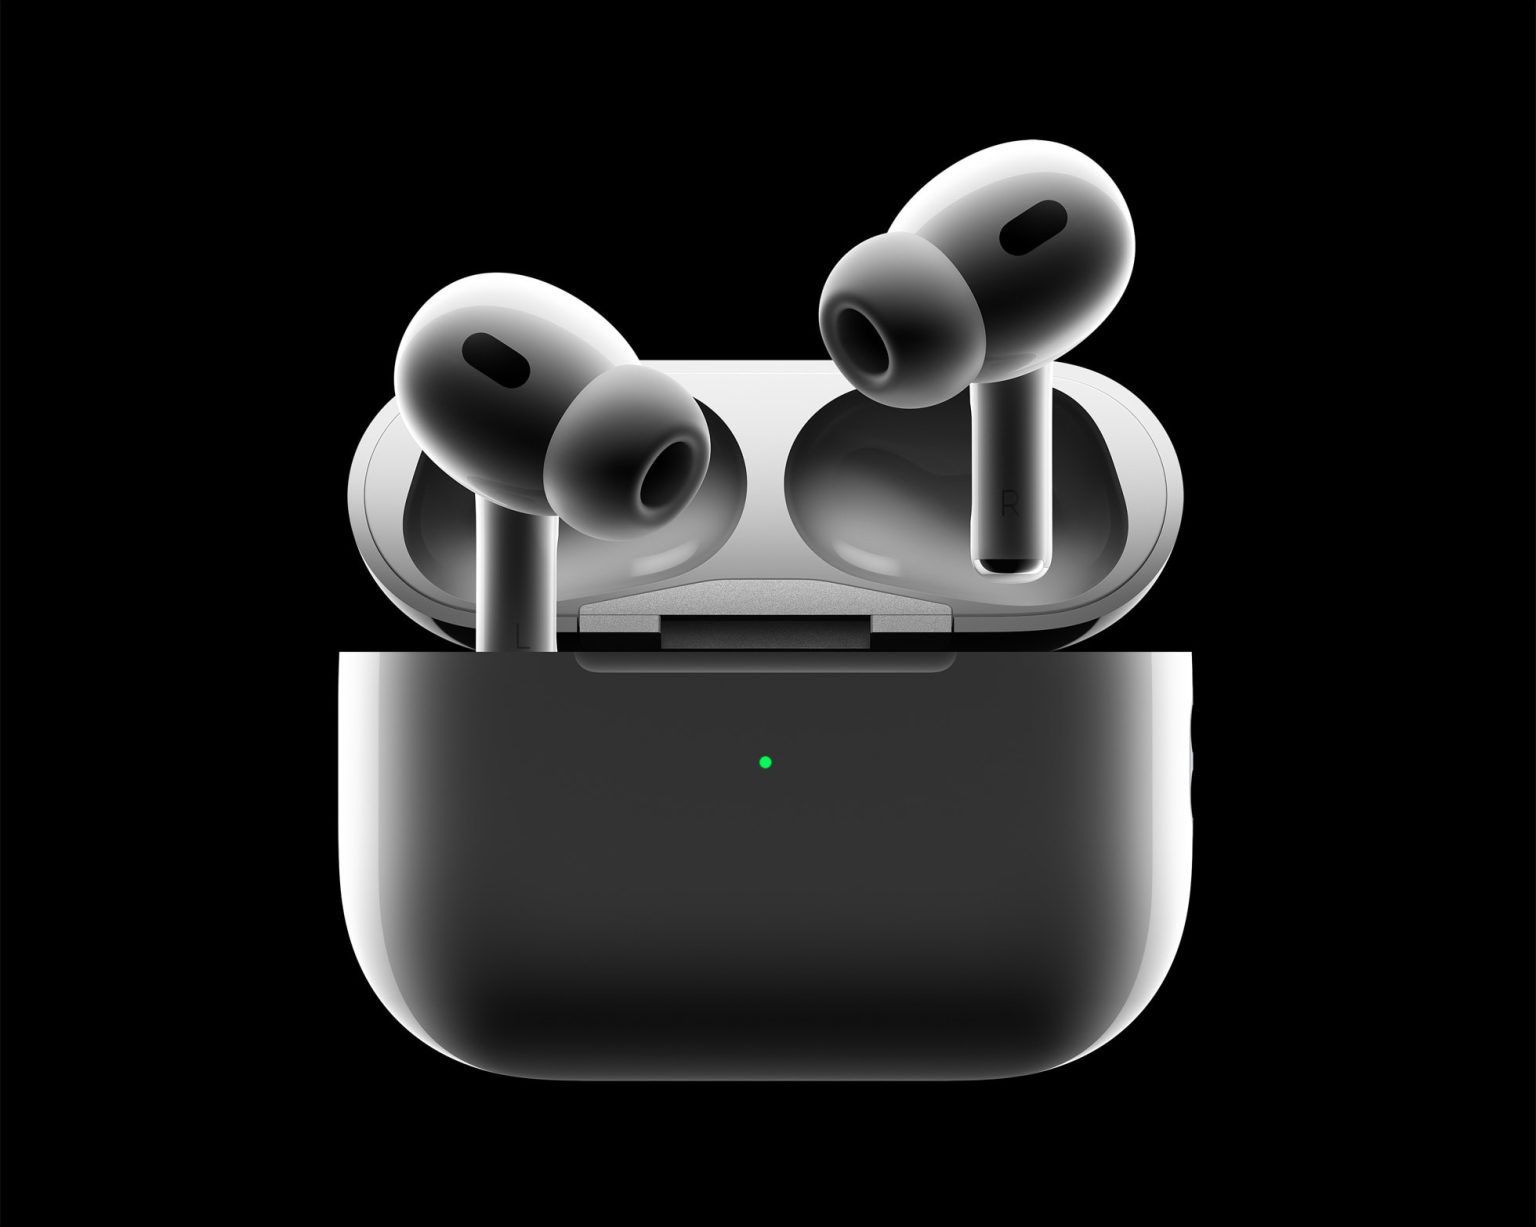 Apple AirPods Pro 2nd gen hero 220907 big.jpg.large 2x 1536x1227 - Apple AirPods Pro 2 Price, review, and Full Specs